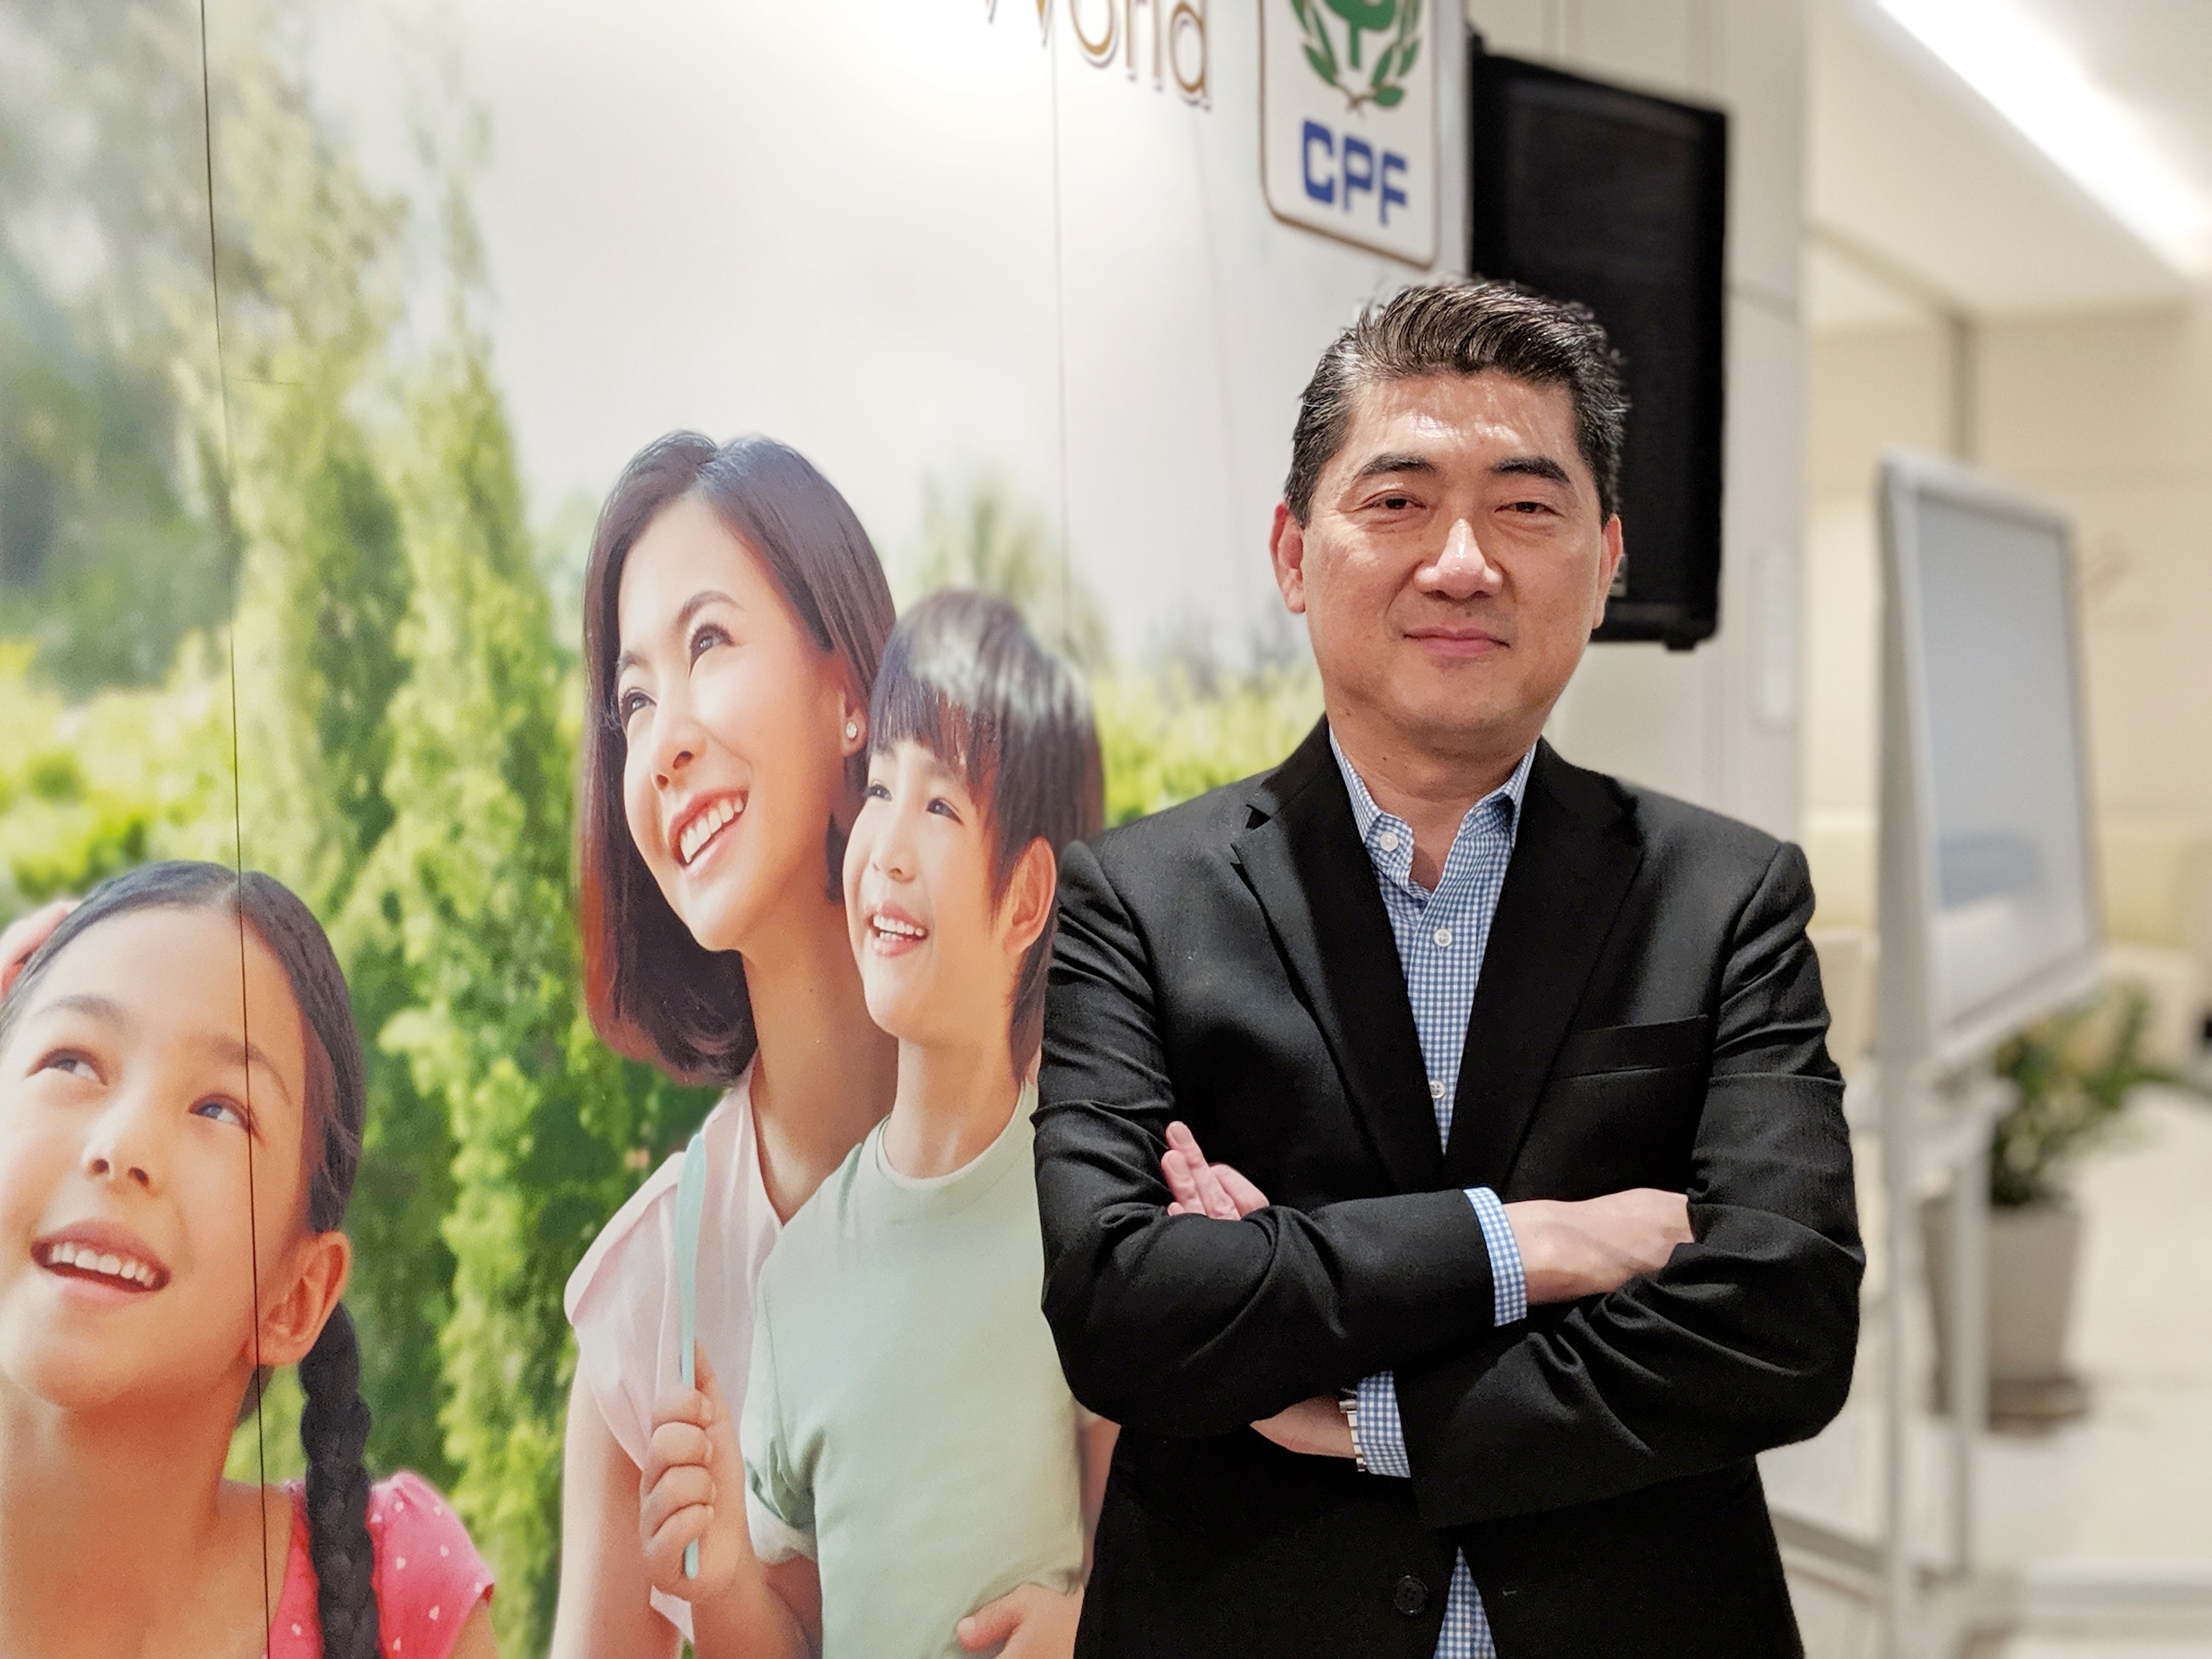 CPF CEO emphasizes "Innovative Kitchen of the World" and leadership